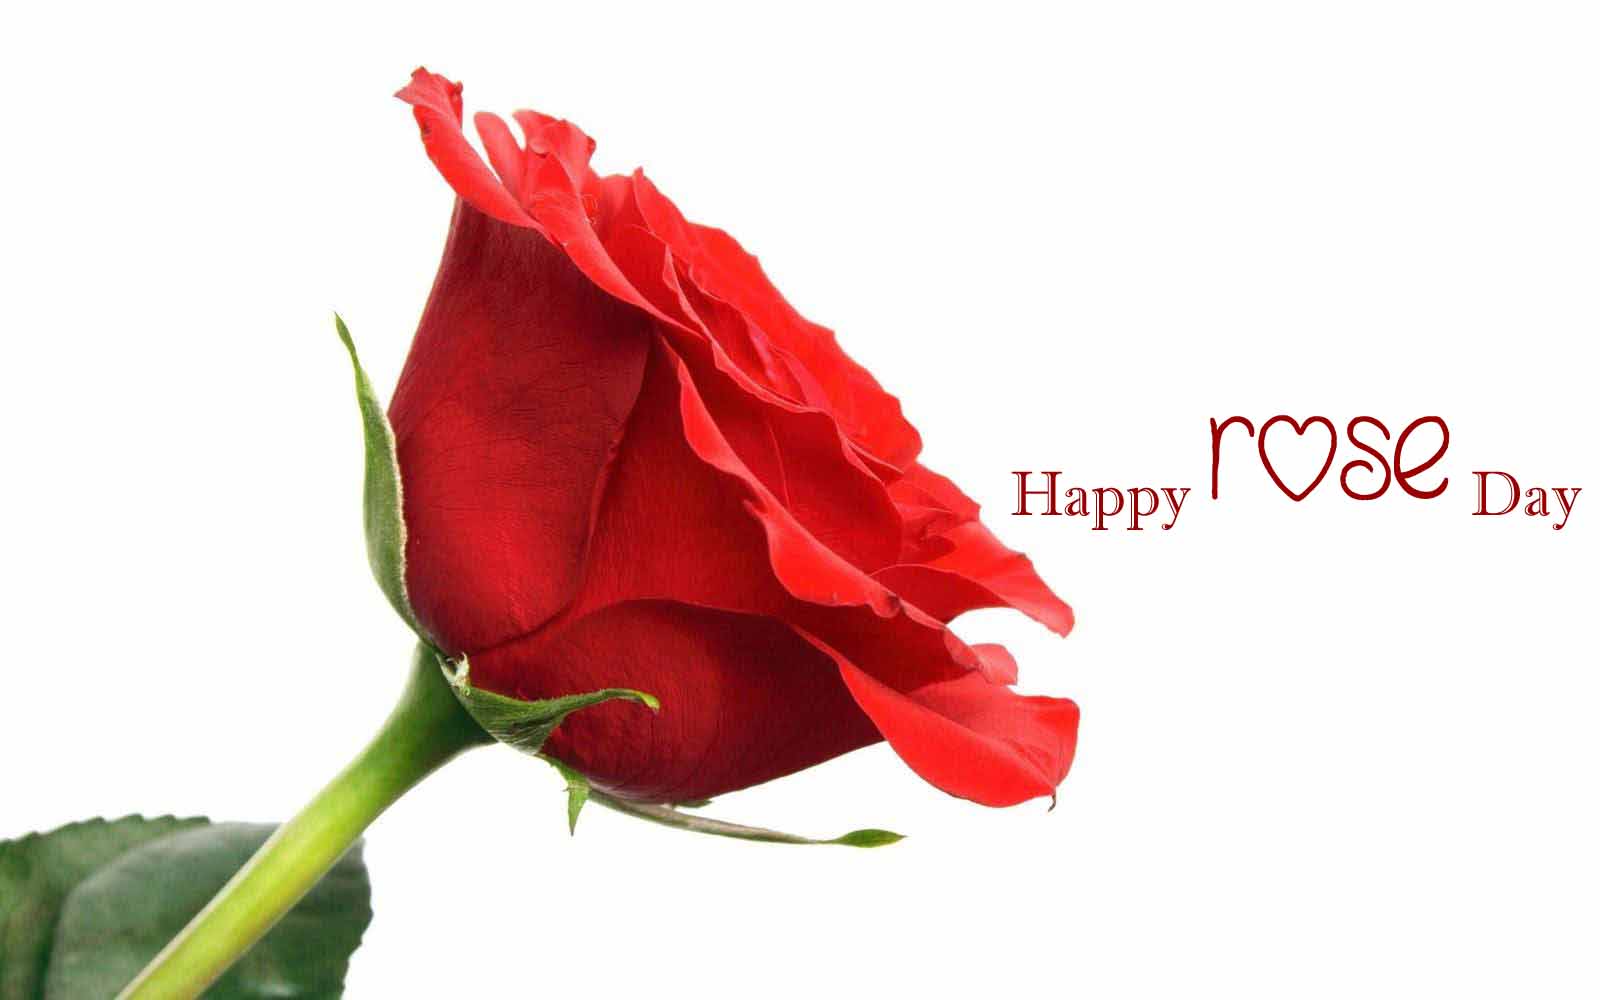 Images of Happy Rose Day 